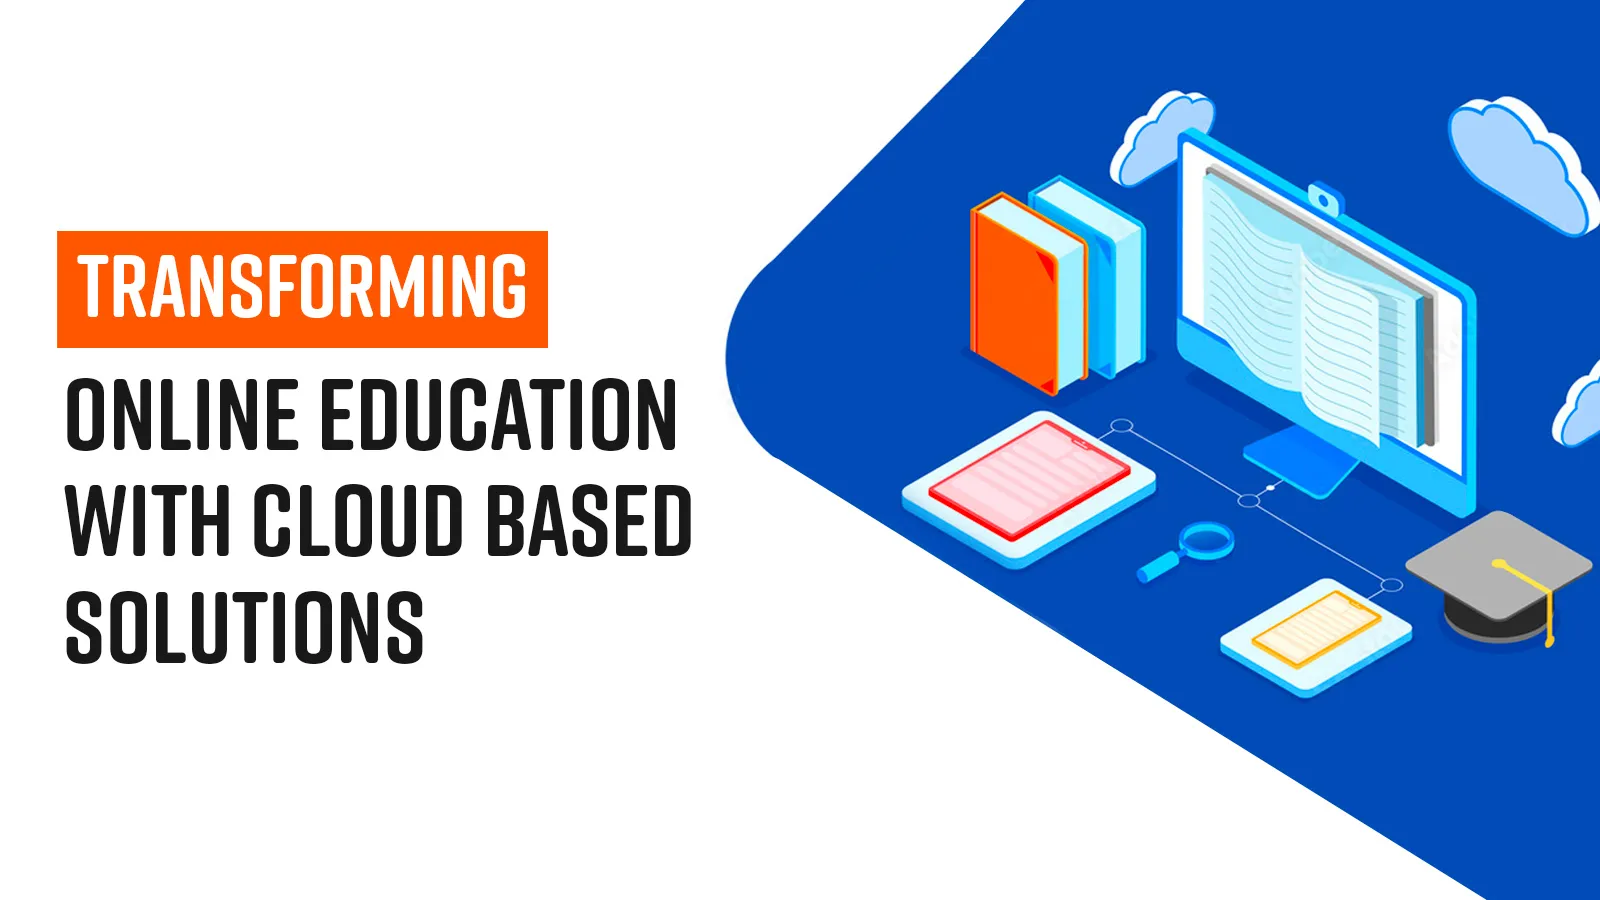 How cloud solutions can help transform online education in the wake of pandemic?